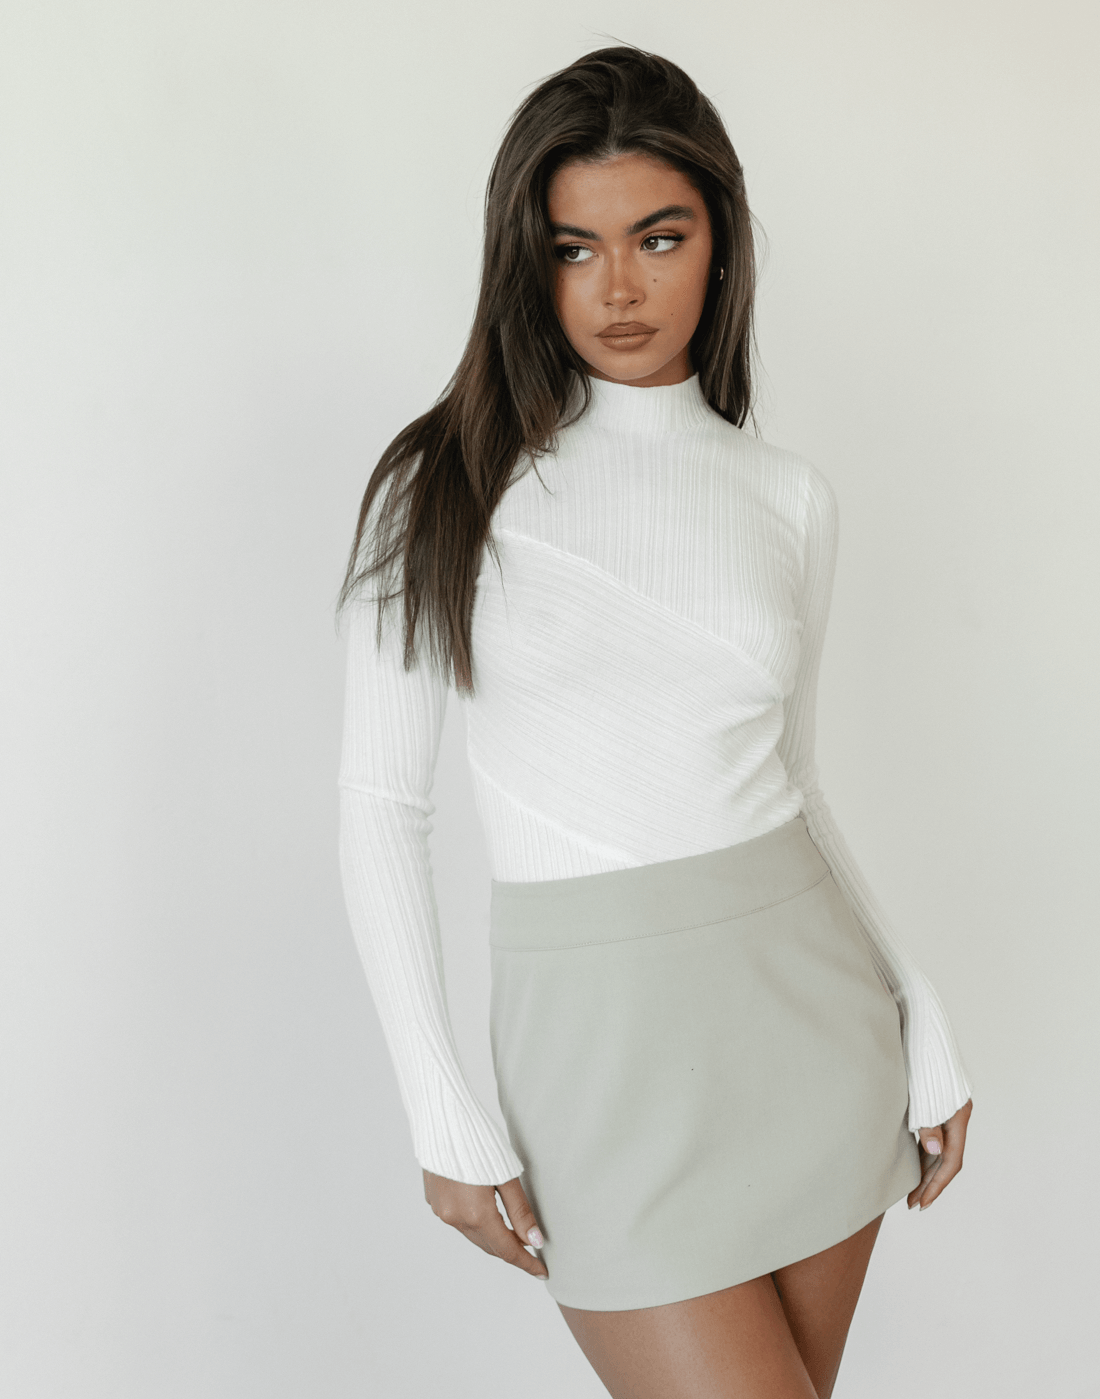  Kirsten Long Sleeve Top (White) - White Knit Long Sleeve Top - Women's Top - Charcoal Clothing